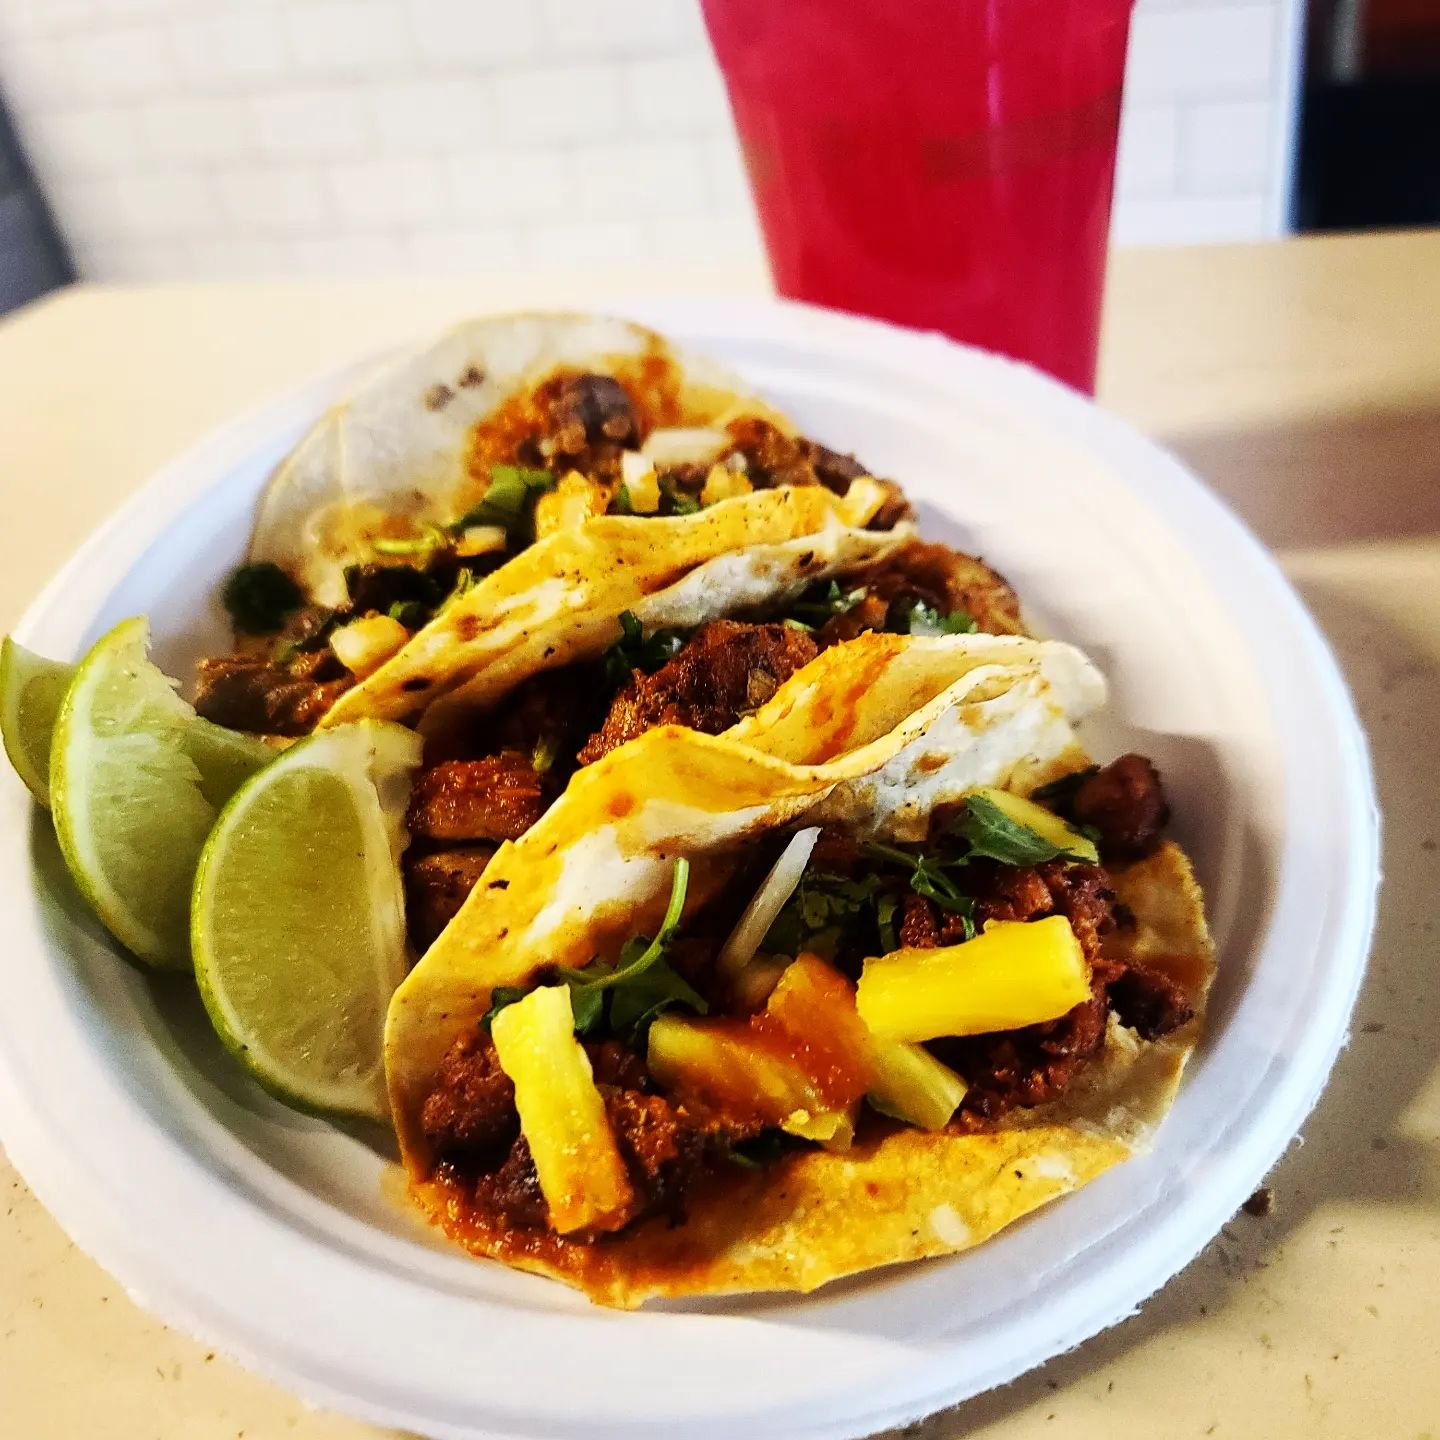 🌮🌮🌮Take in these delicious street tacos from @tinos.tacos. $2 all day.🌮🌮🌮

#TacoTuesday #LetsEat #ABQfoodies #AlPasto​​r🍍